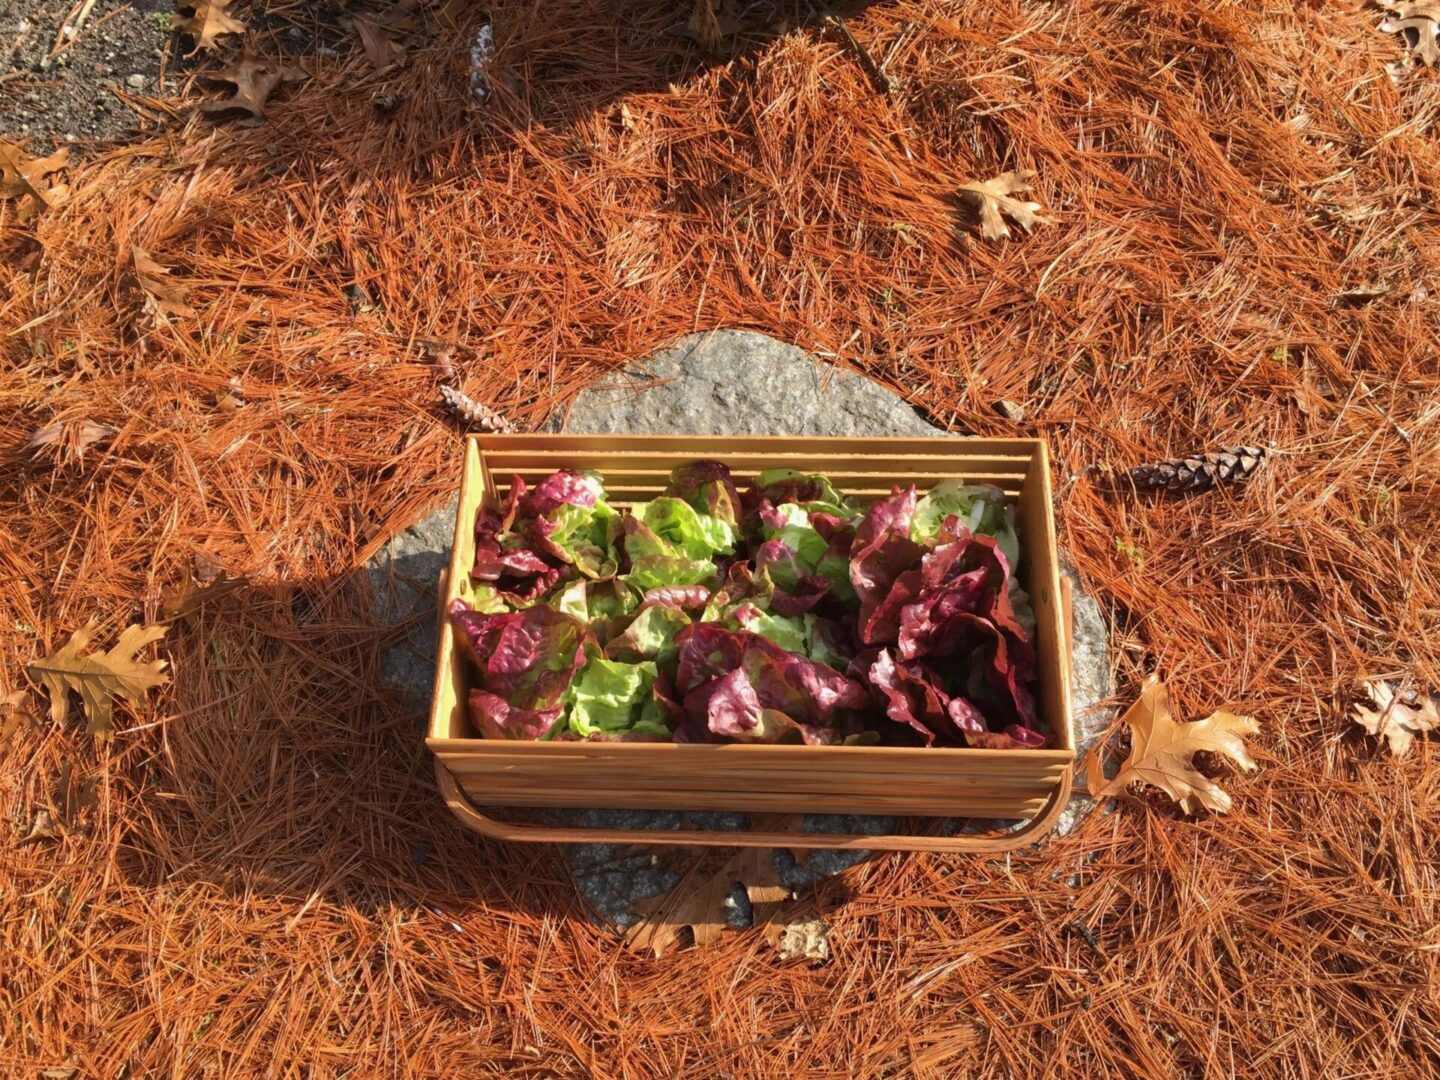 A wooden box filled with lettuce on top of the ground.